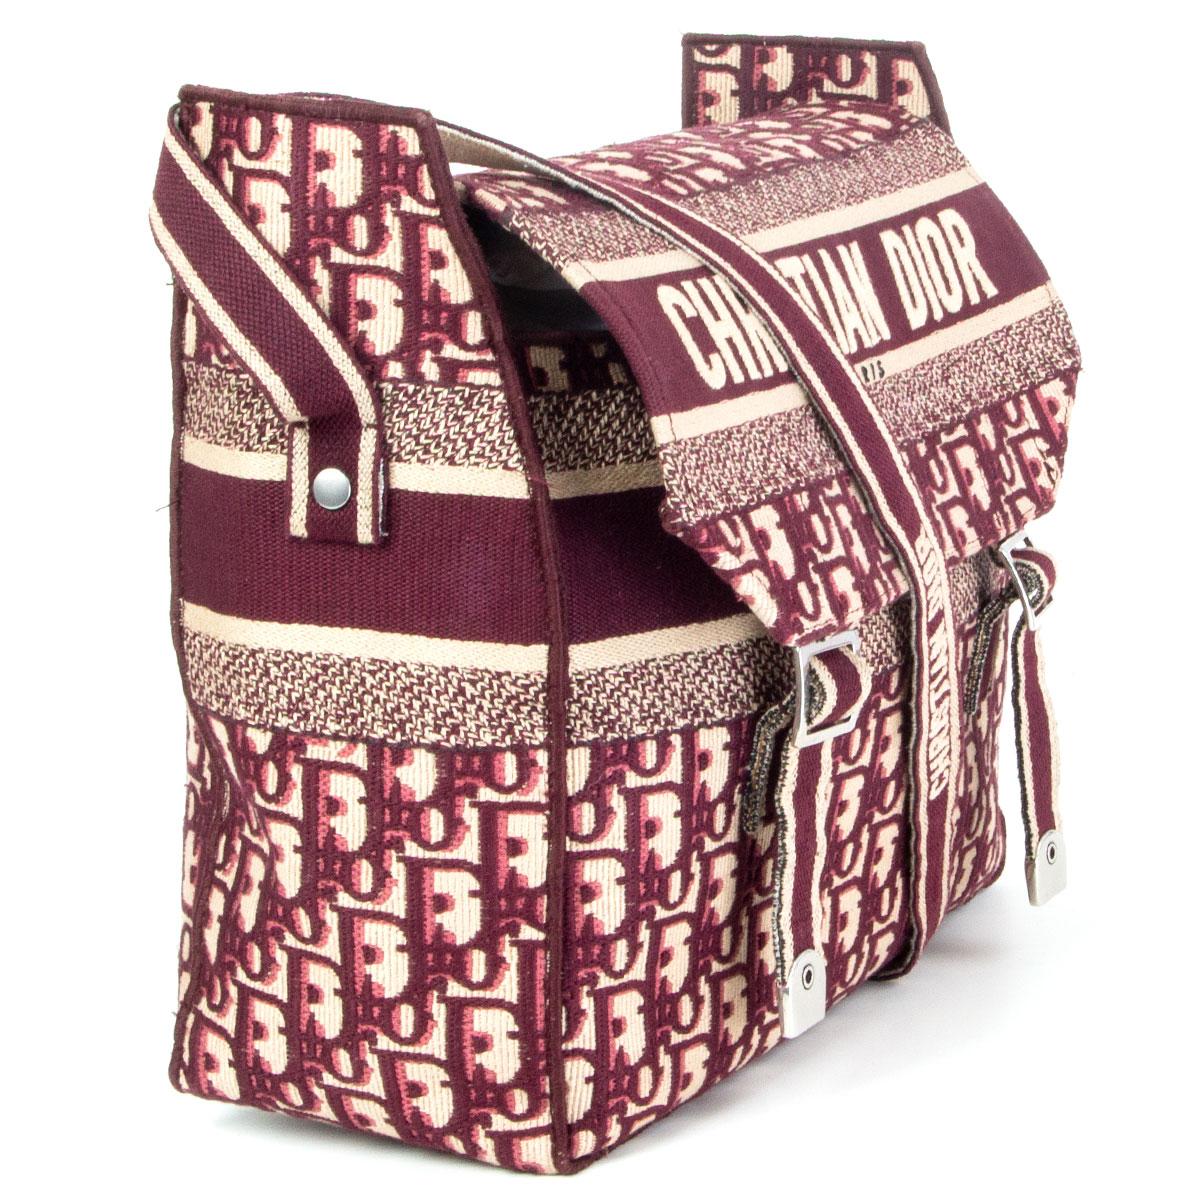 authentic Christian Dior Diorcamp messenger bag in burgundy Dior Oblique embroidered canvas. Opens with two buckles and a flap. Unlined. Has been carried and is in excellent condition. 

Height 28.5cm (11.1in)
Width 25cm (9.8in)
Depth 12cm